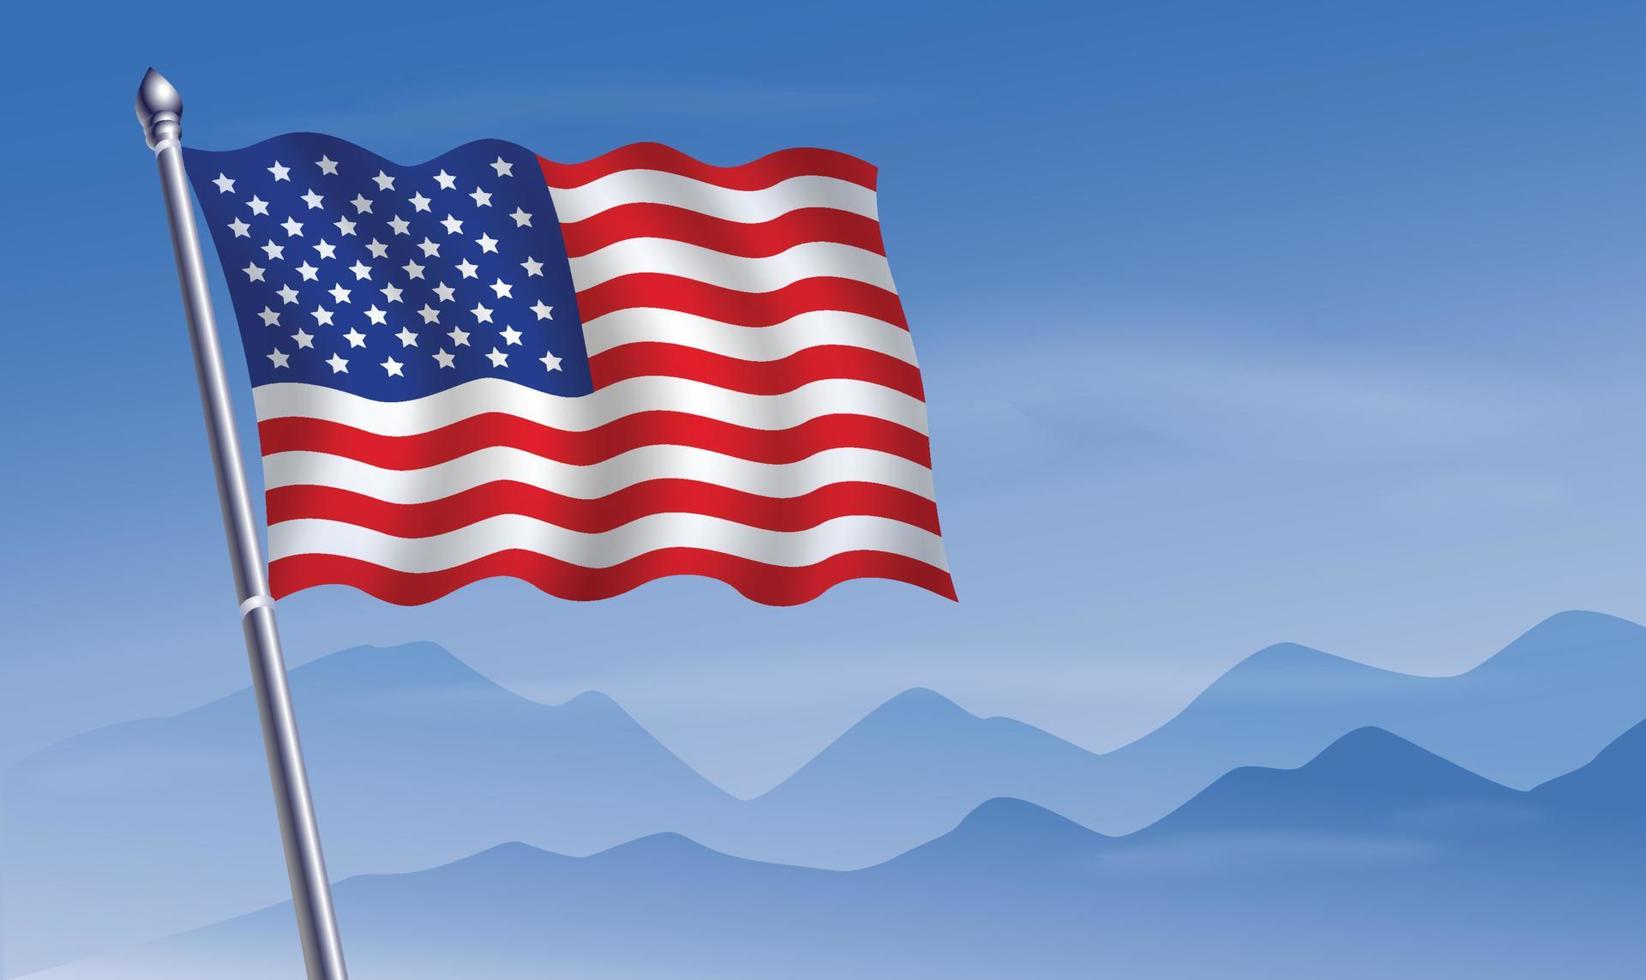 United States flag with background of mountains and sky vector